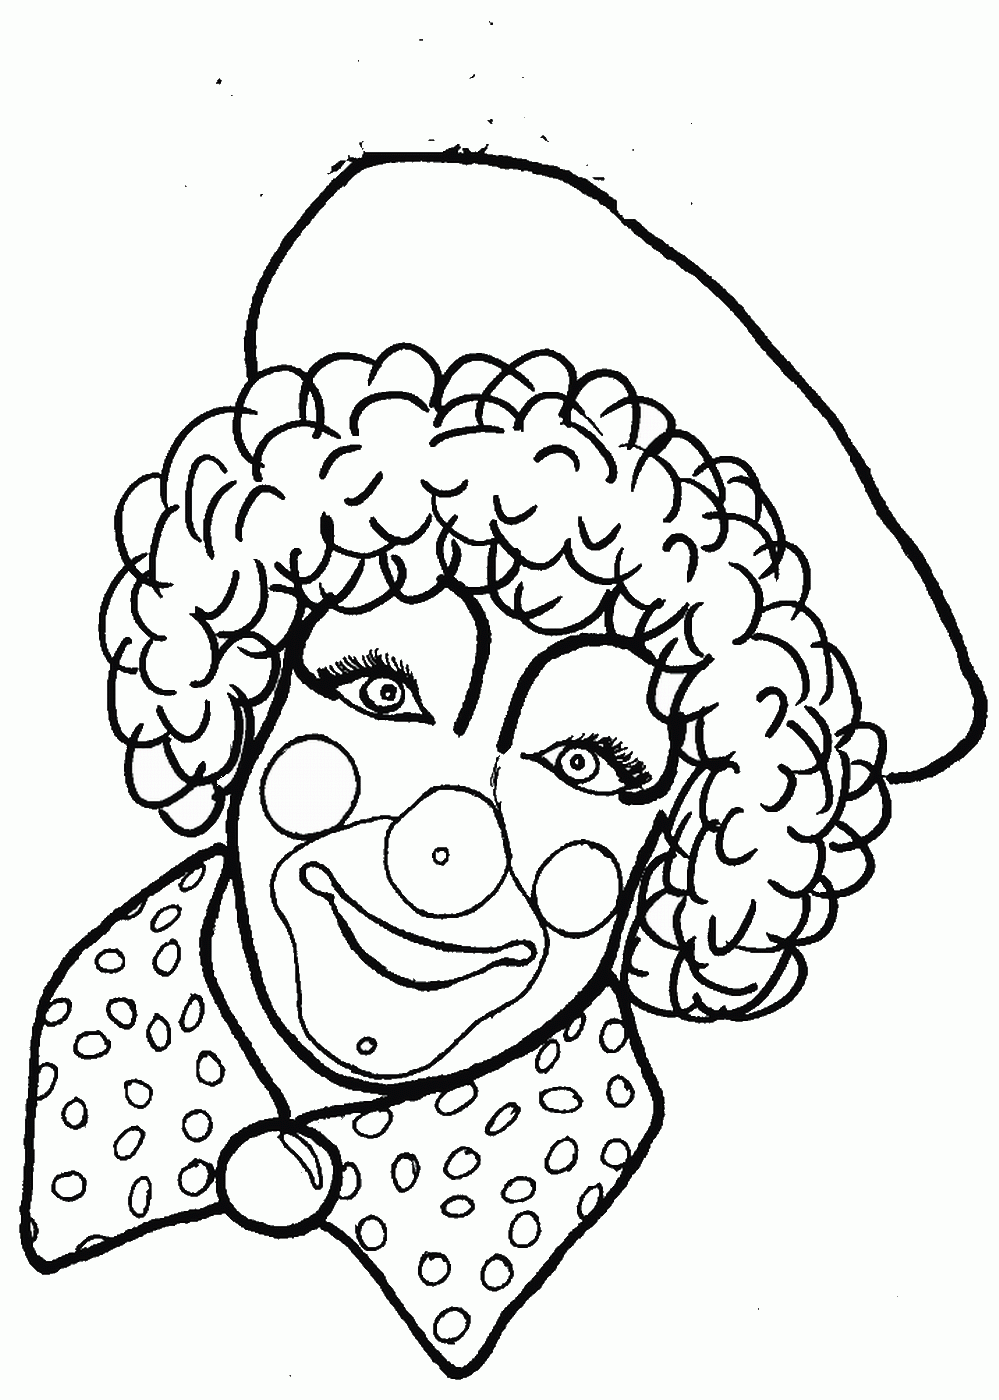 Clown Coloring Pages clownc20 Printable 2021 1768 Coloring4free